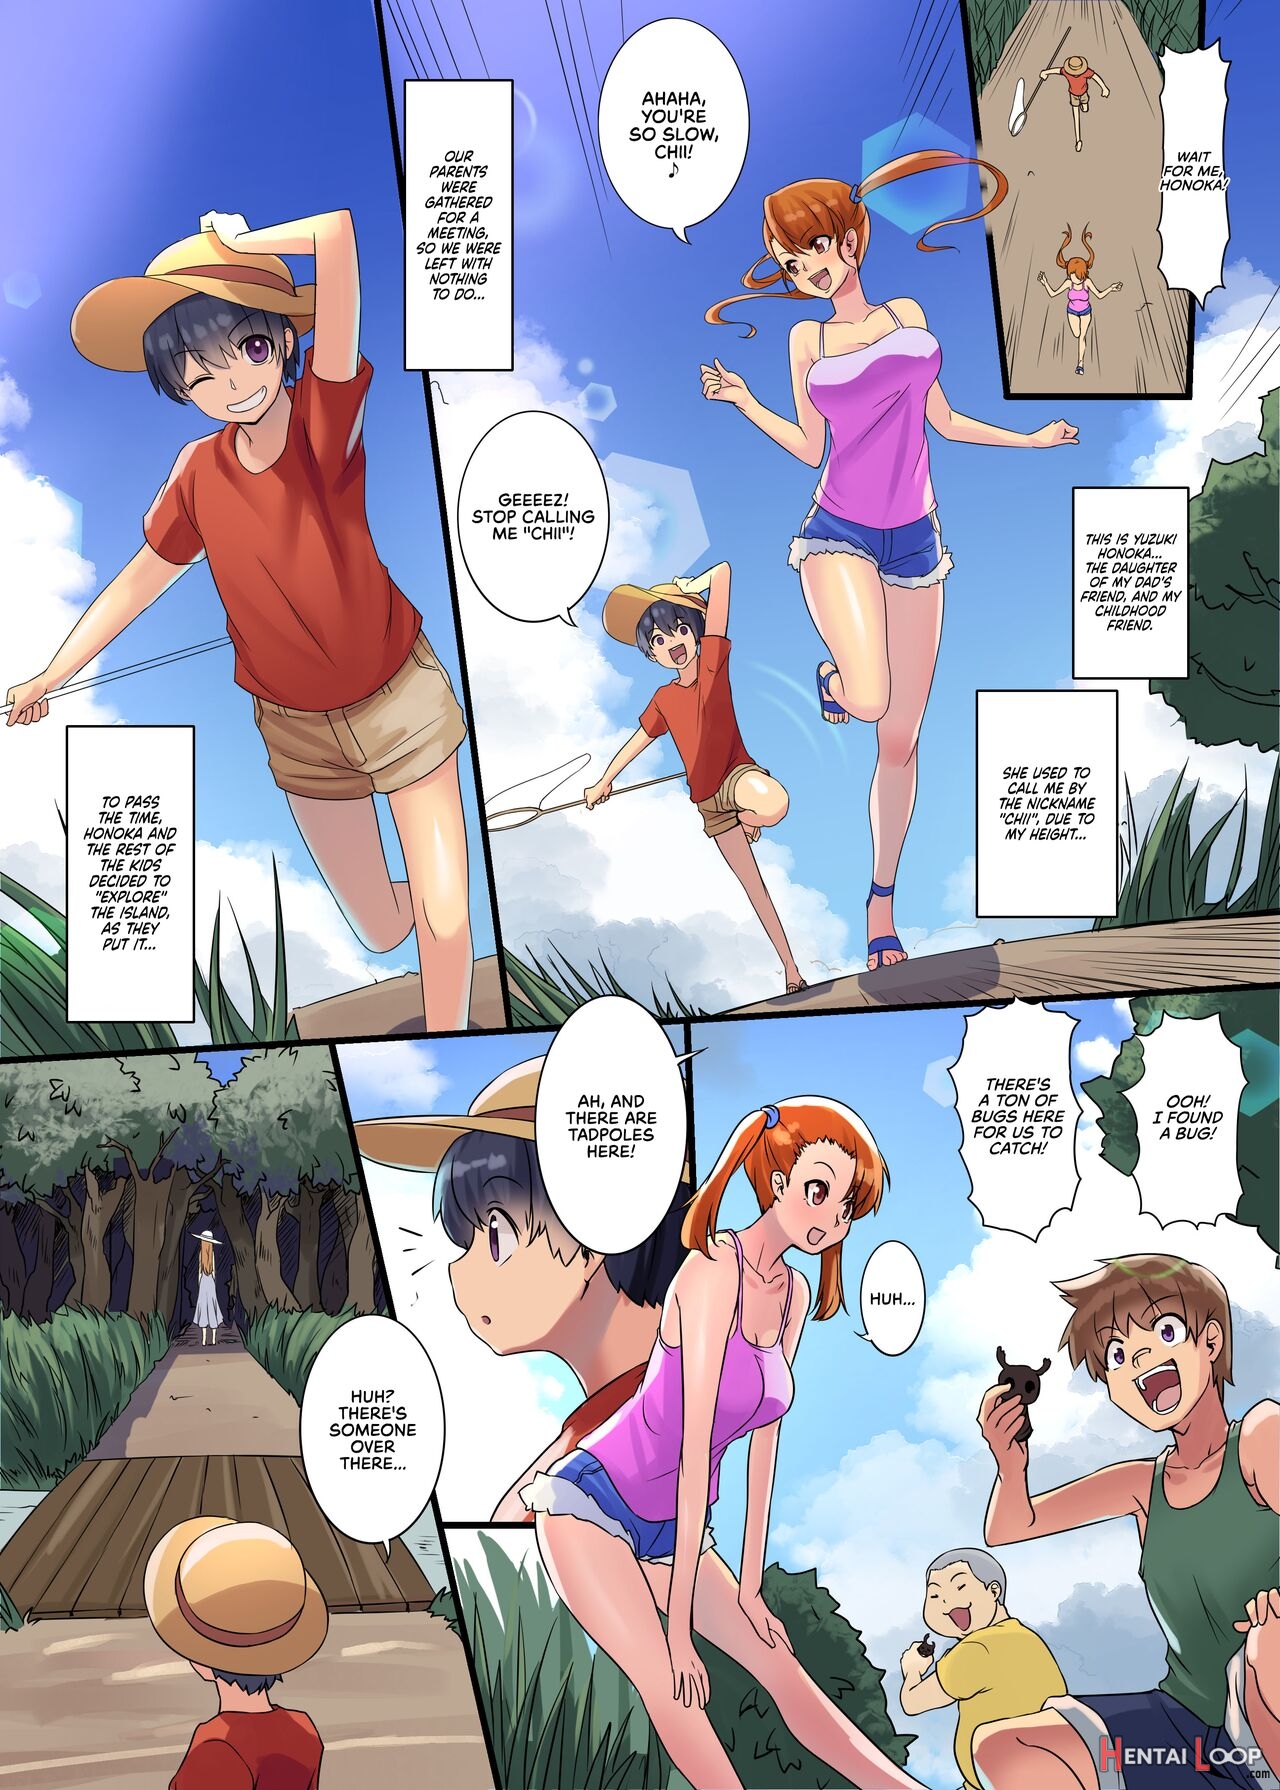 Adultery Tales With The Bizarre ~kotabe-sama Of A Remote Island Arc~ page 4